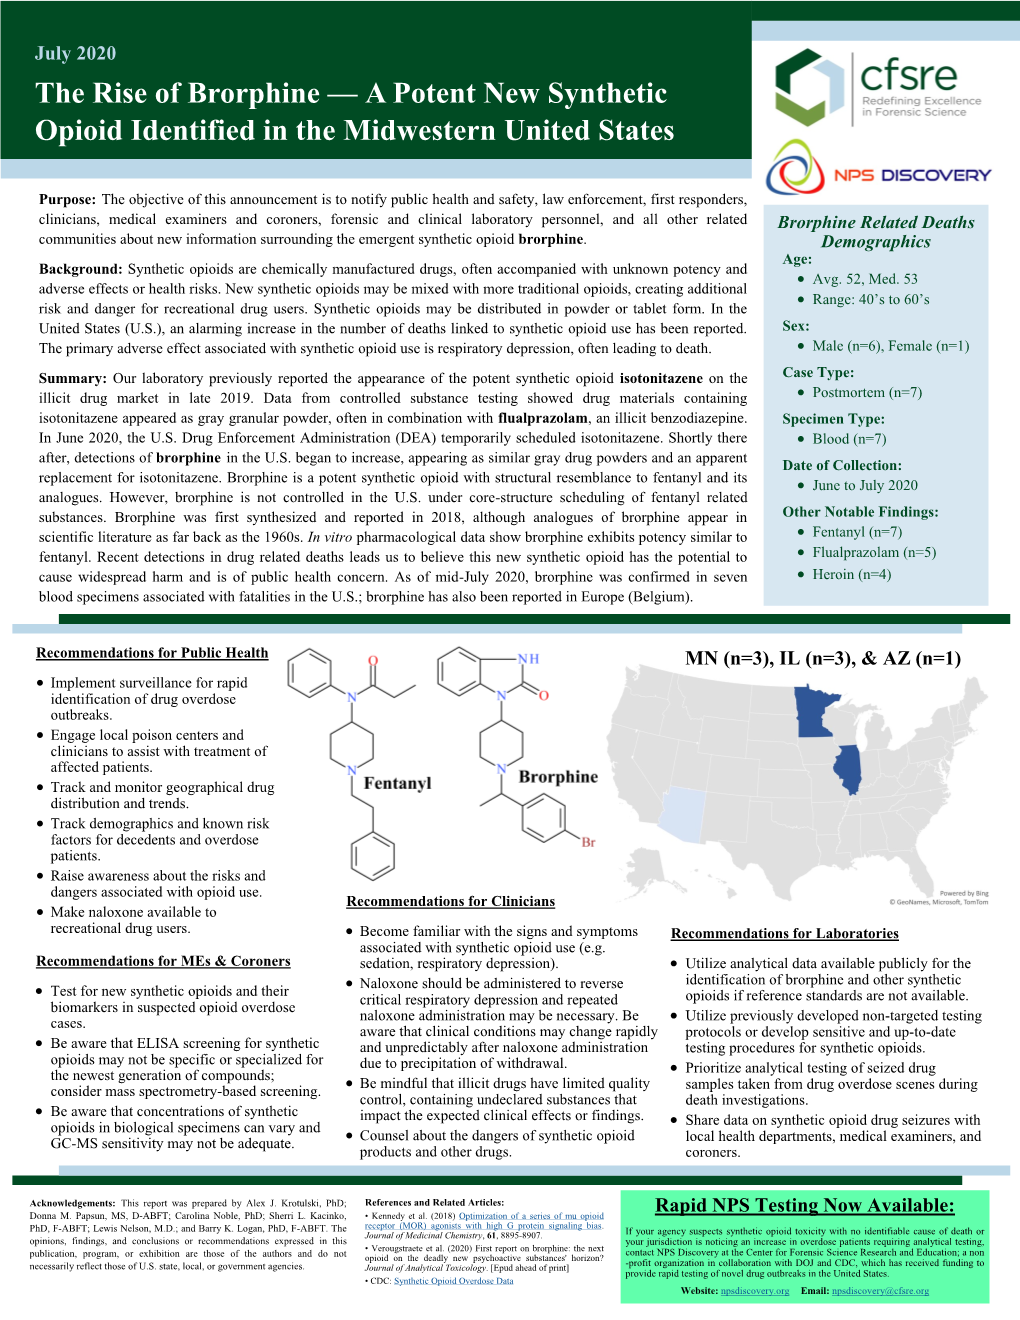 Brorphine — a Potent New Synthetic Opioid Identified in the Midwestern United States